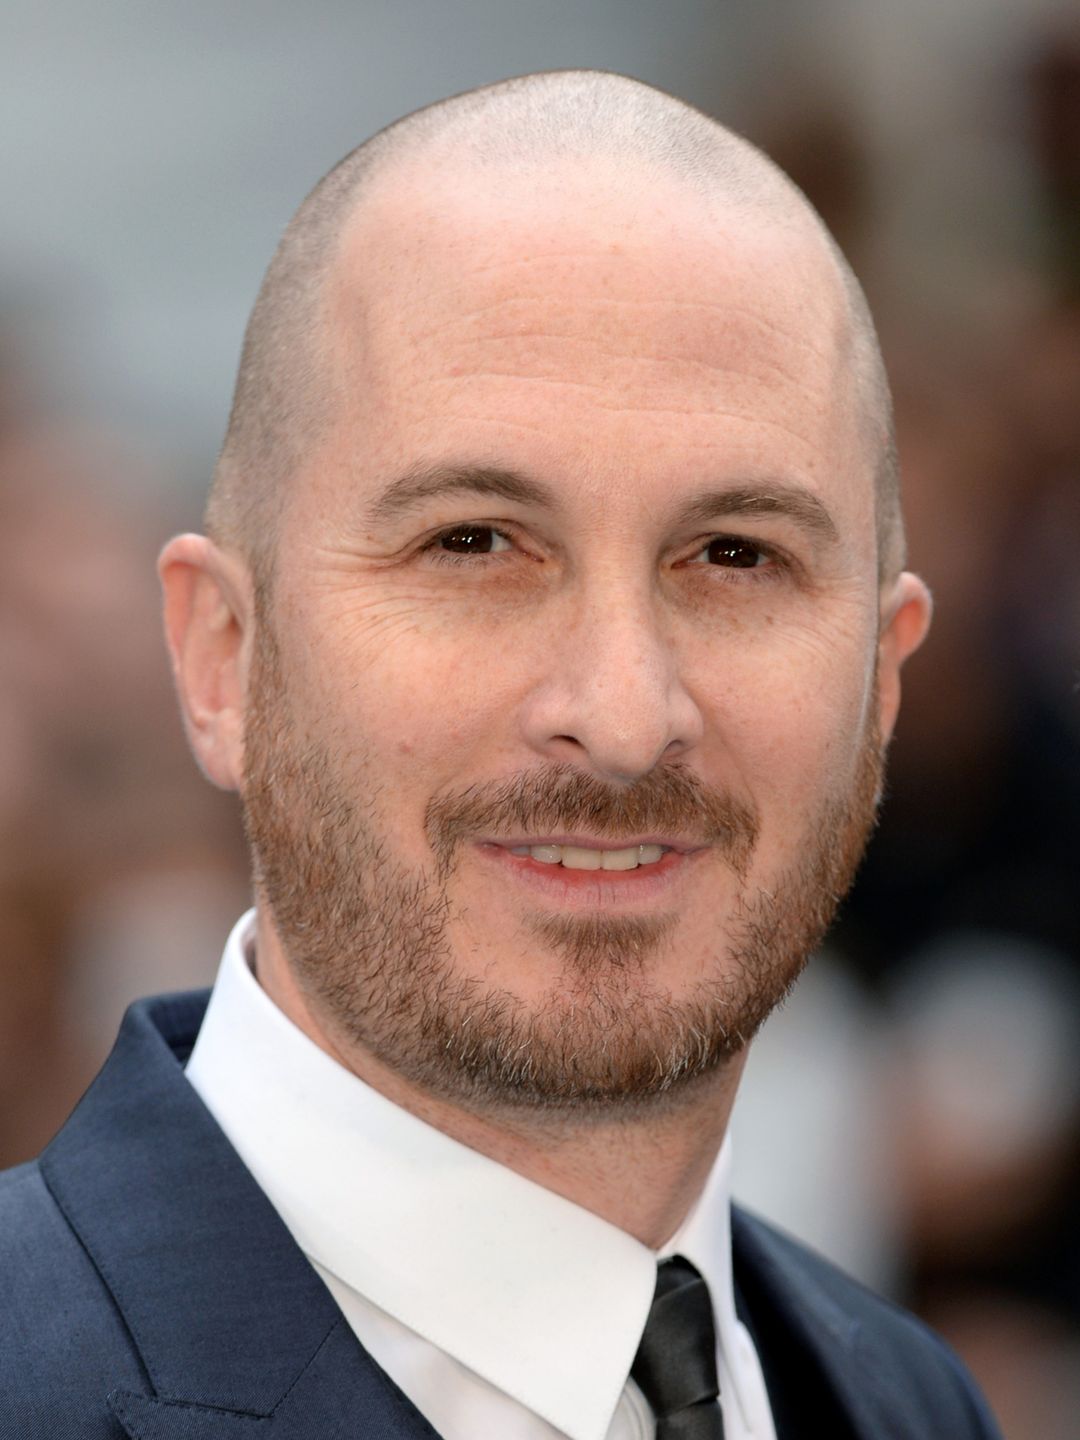 Darren Aronofsky in his youth